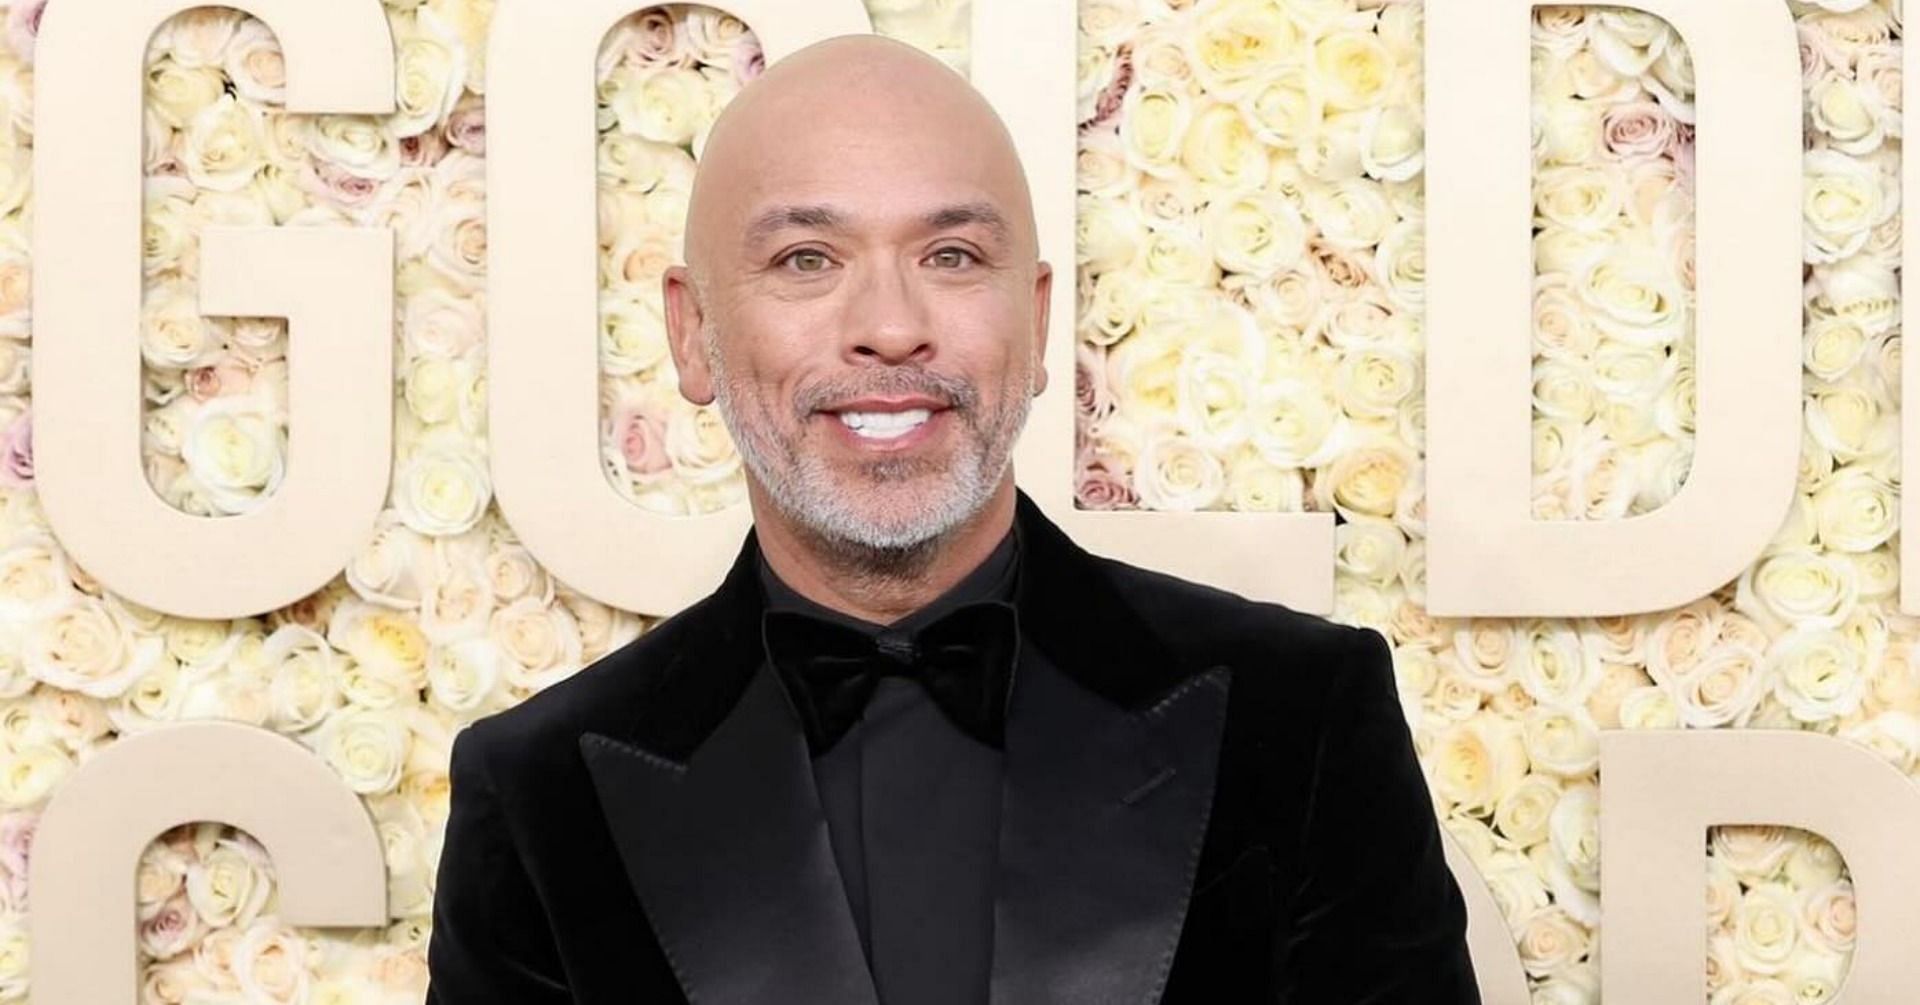 “That’s hilarious, I don’t care”. Jo Koy’s unapologetic Golden Globes